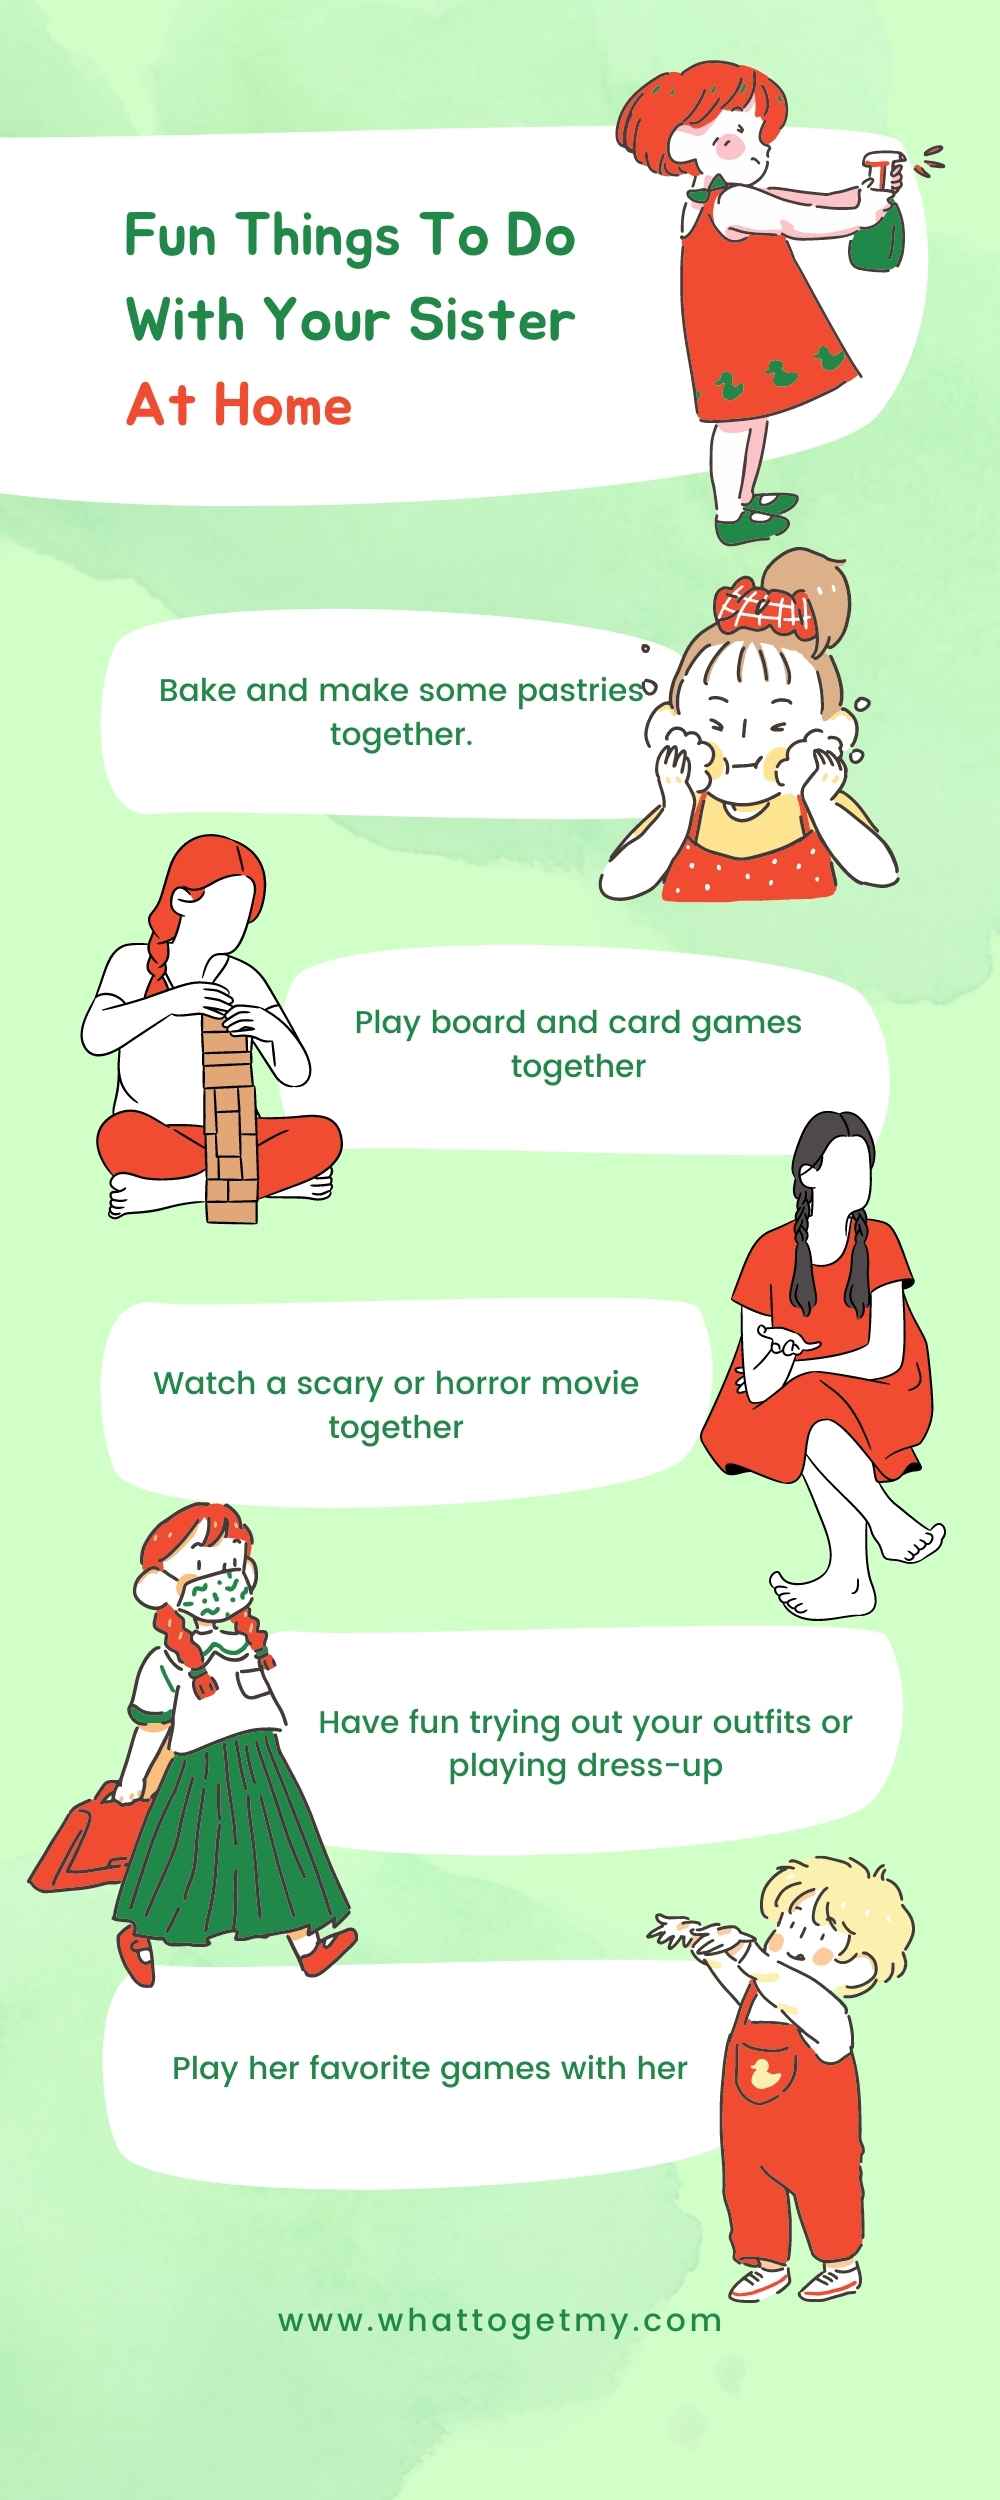 Fun Things To Do With Your Sister At Home